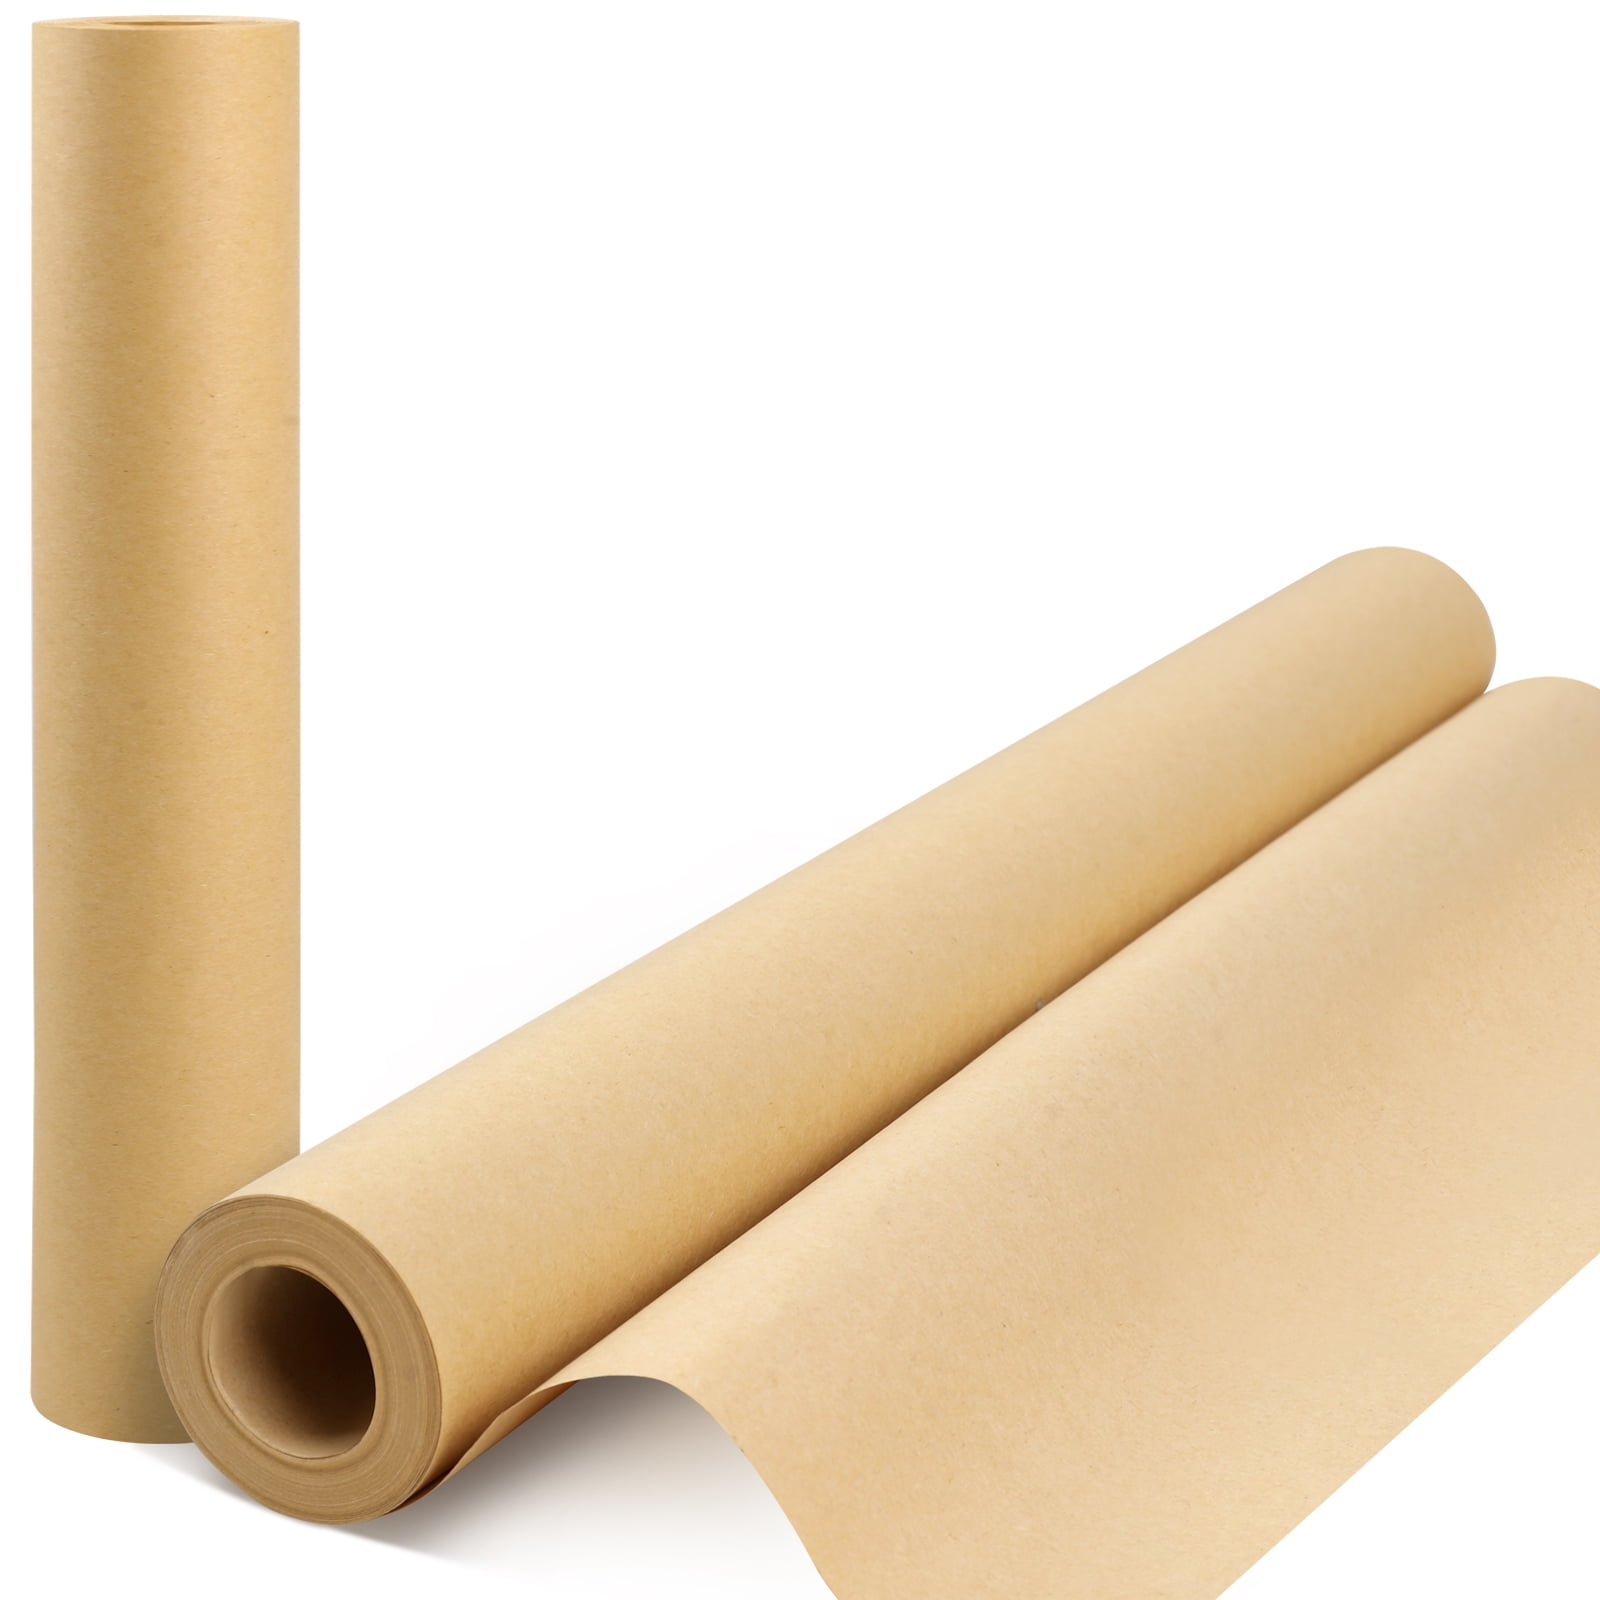 Brown Paper Roll 15400, Brown Wrapping Paper, Wrapping Paper, Craft Paper,  Packing Paper for Moving, Packing, Gift Wrapping, Wall Art, Table Runner,  Floor Covering 